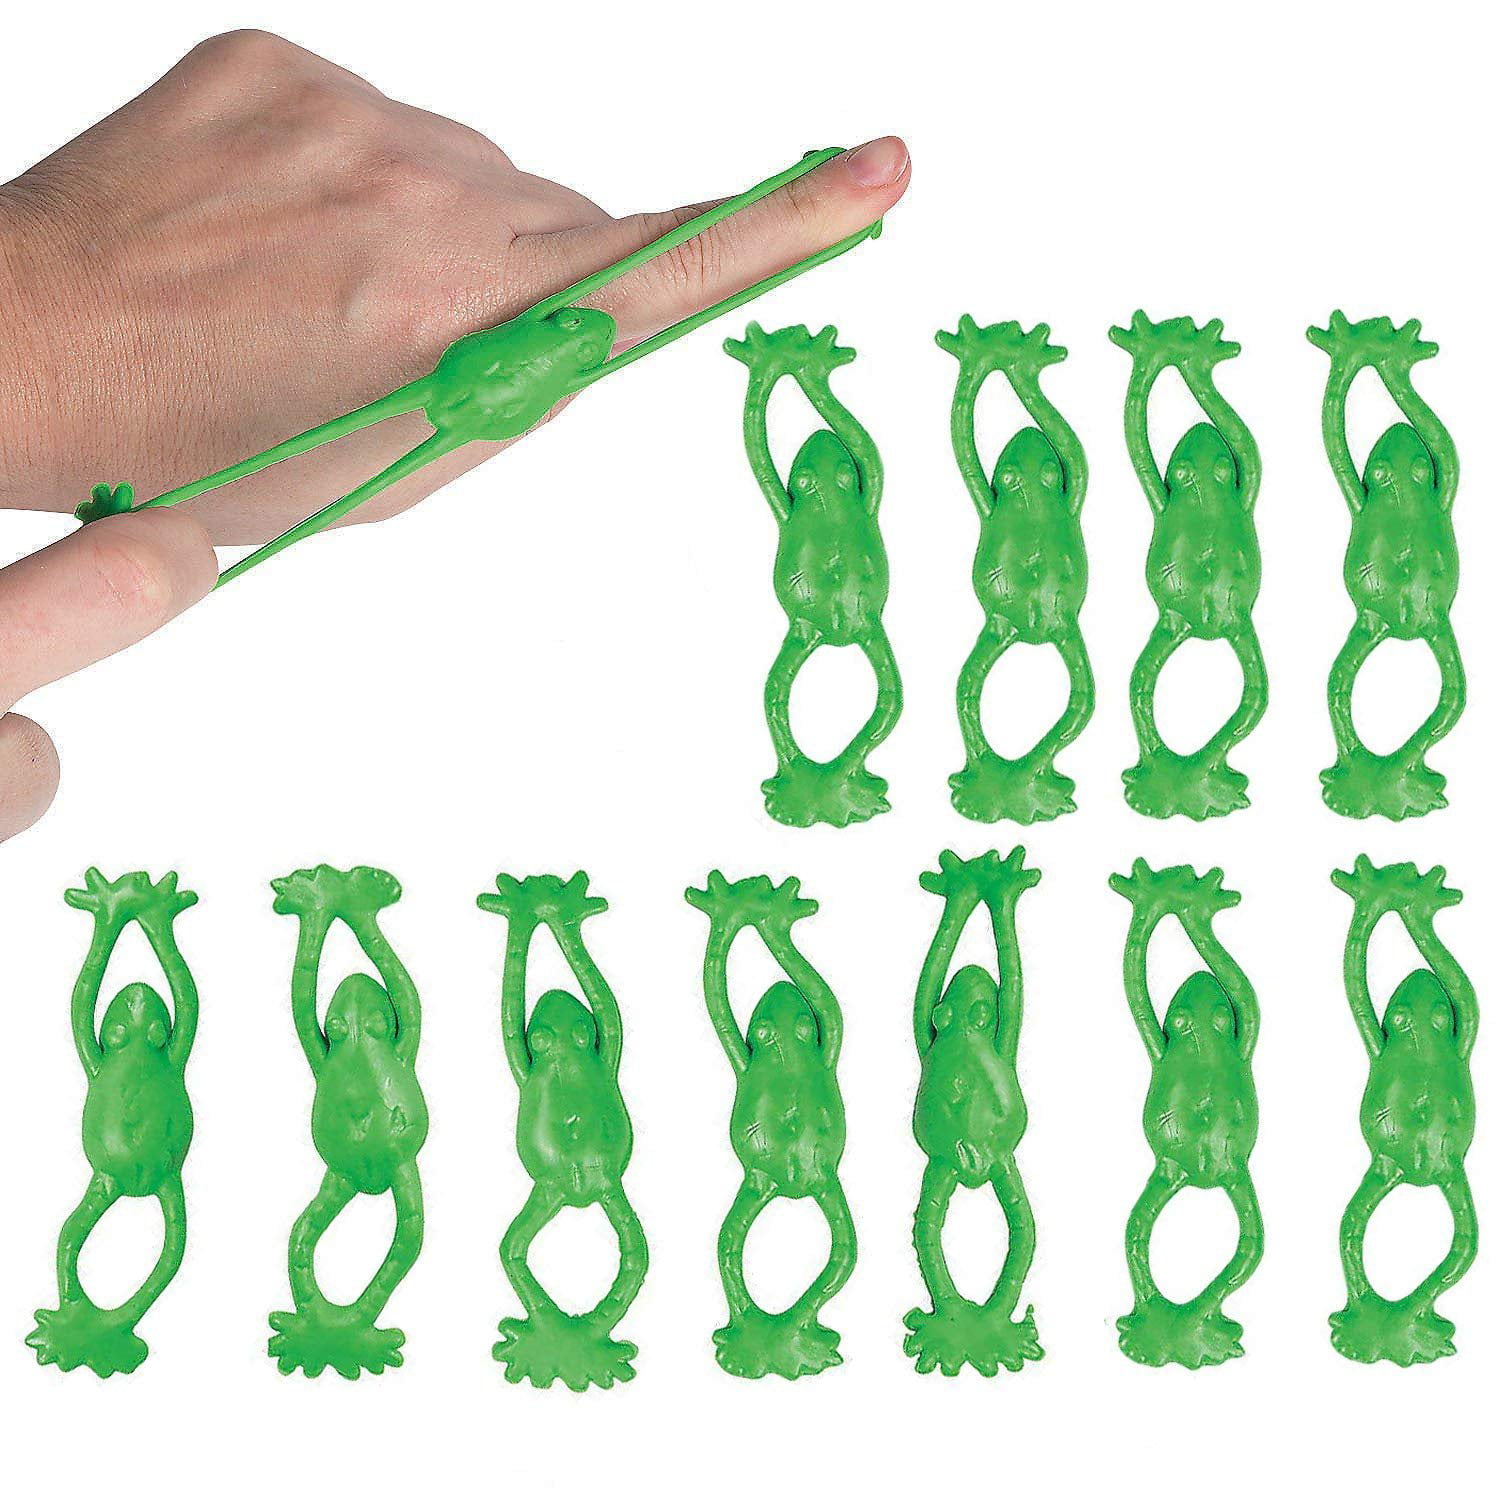 6 Sticky Stretchy Frogs Toy Prizes Party Favors Teacher Prizes Silly Fun 